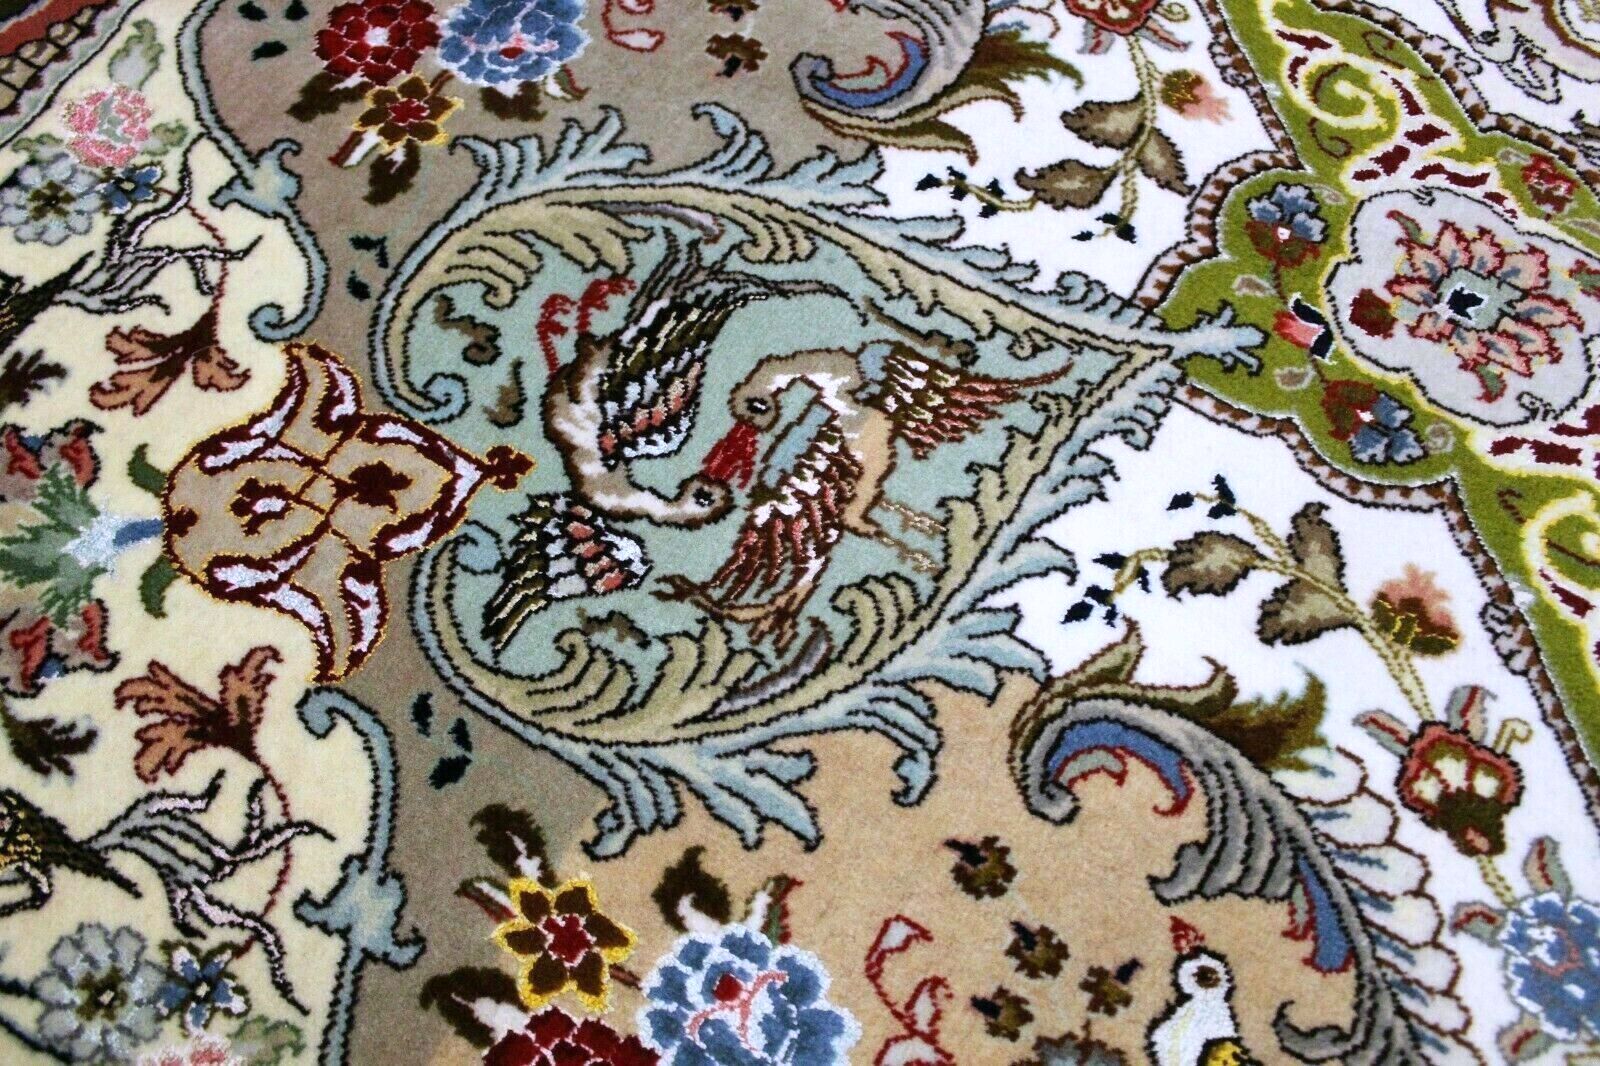 Close-up of silk highlights on Handmade Vintage Persian Tabriz Rug - Delicate silk threads adding subtle luminosity to the intricate patterns.